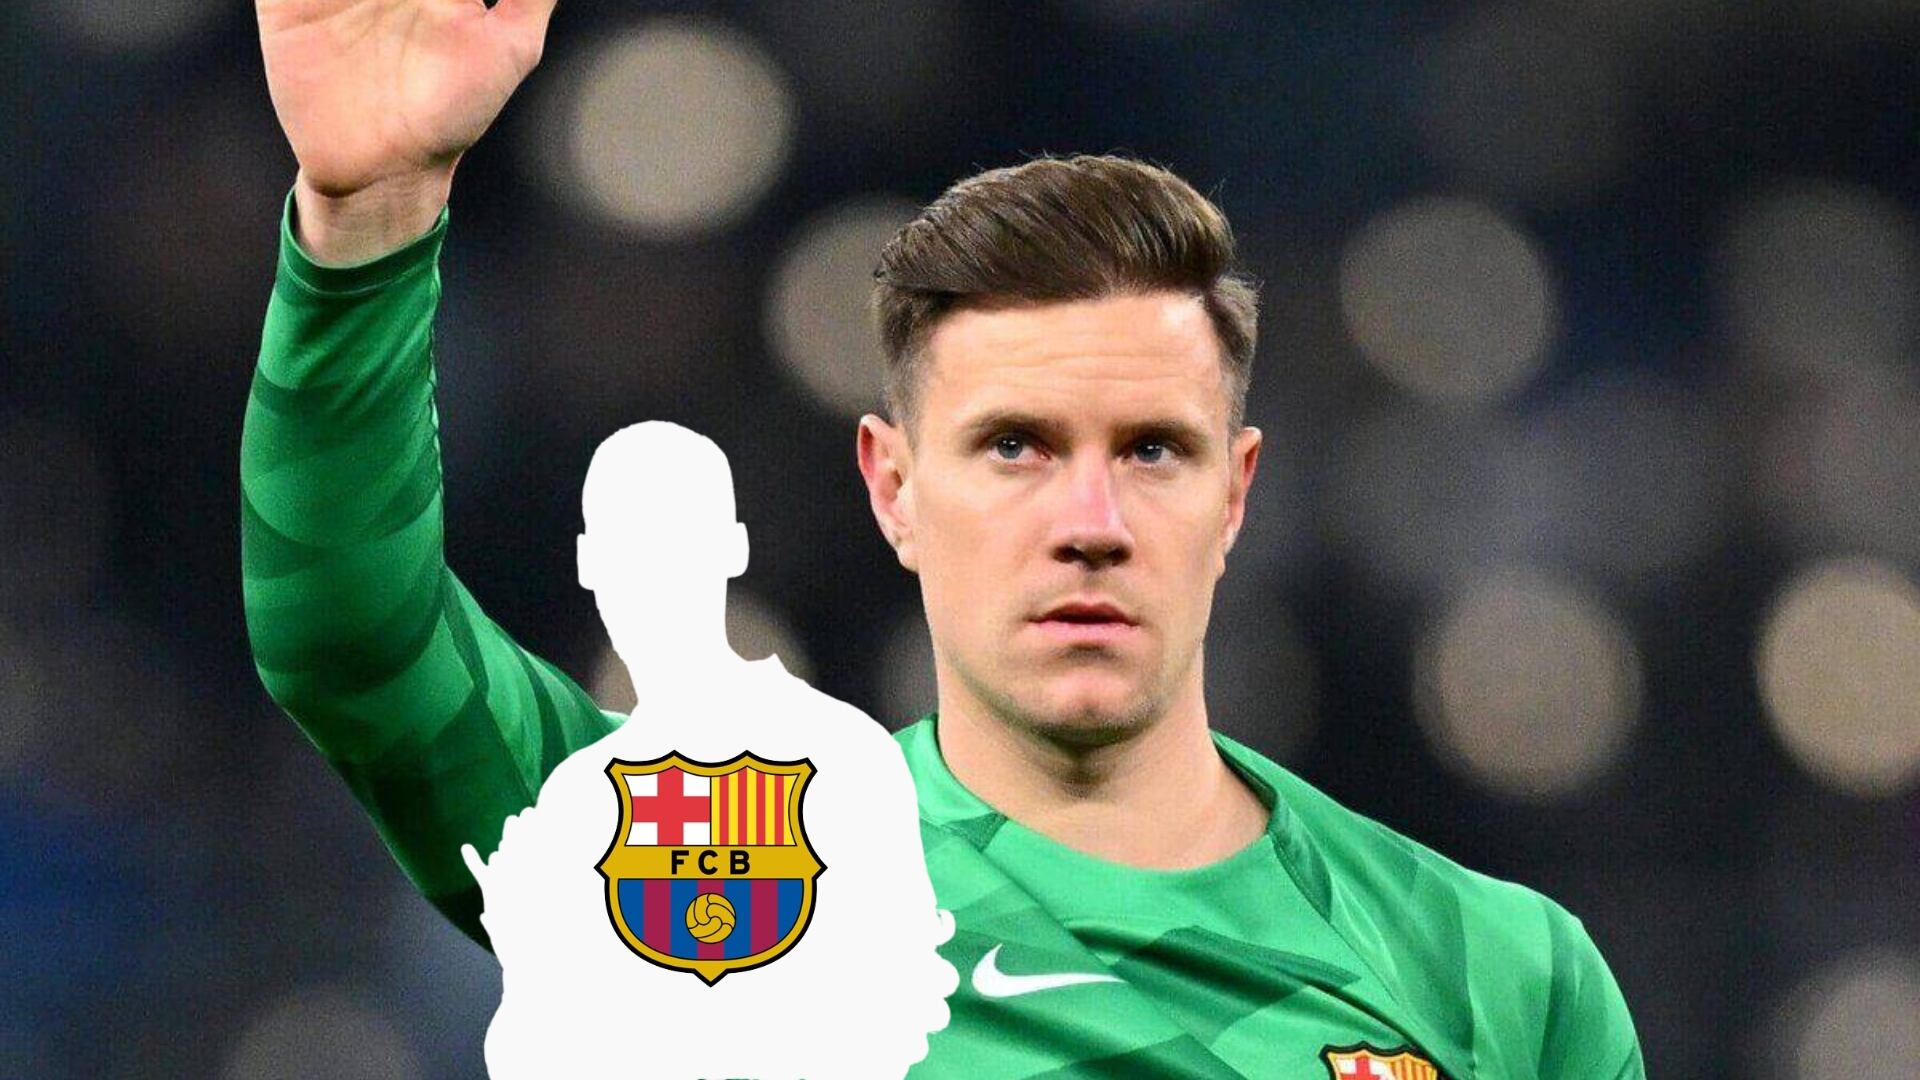 Tired of Ter Stegen? FC Barcelona is looking for his possible replacement, and they could find a top goalkeeper for free